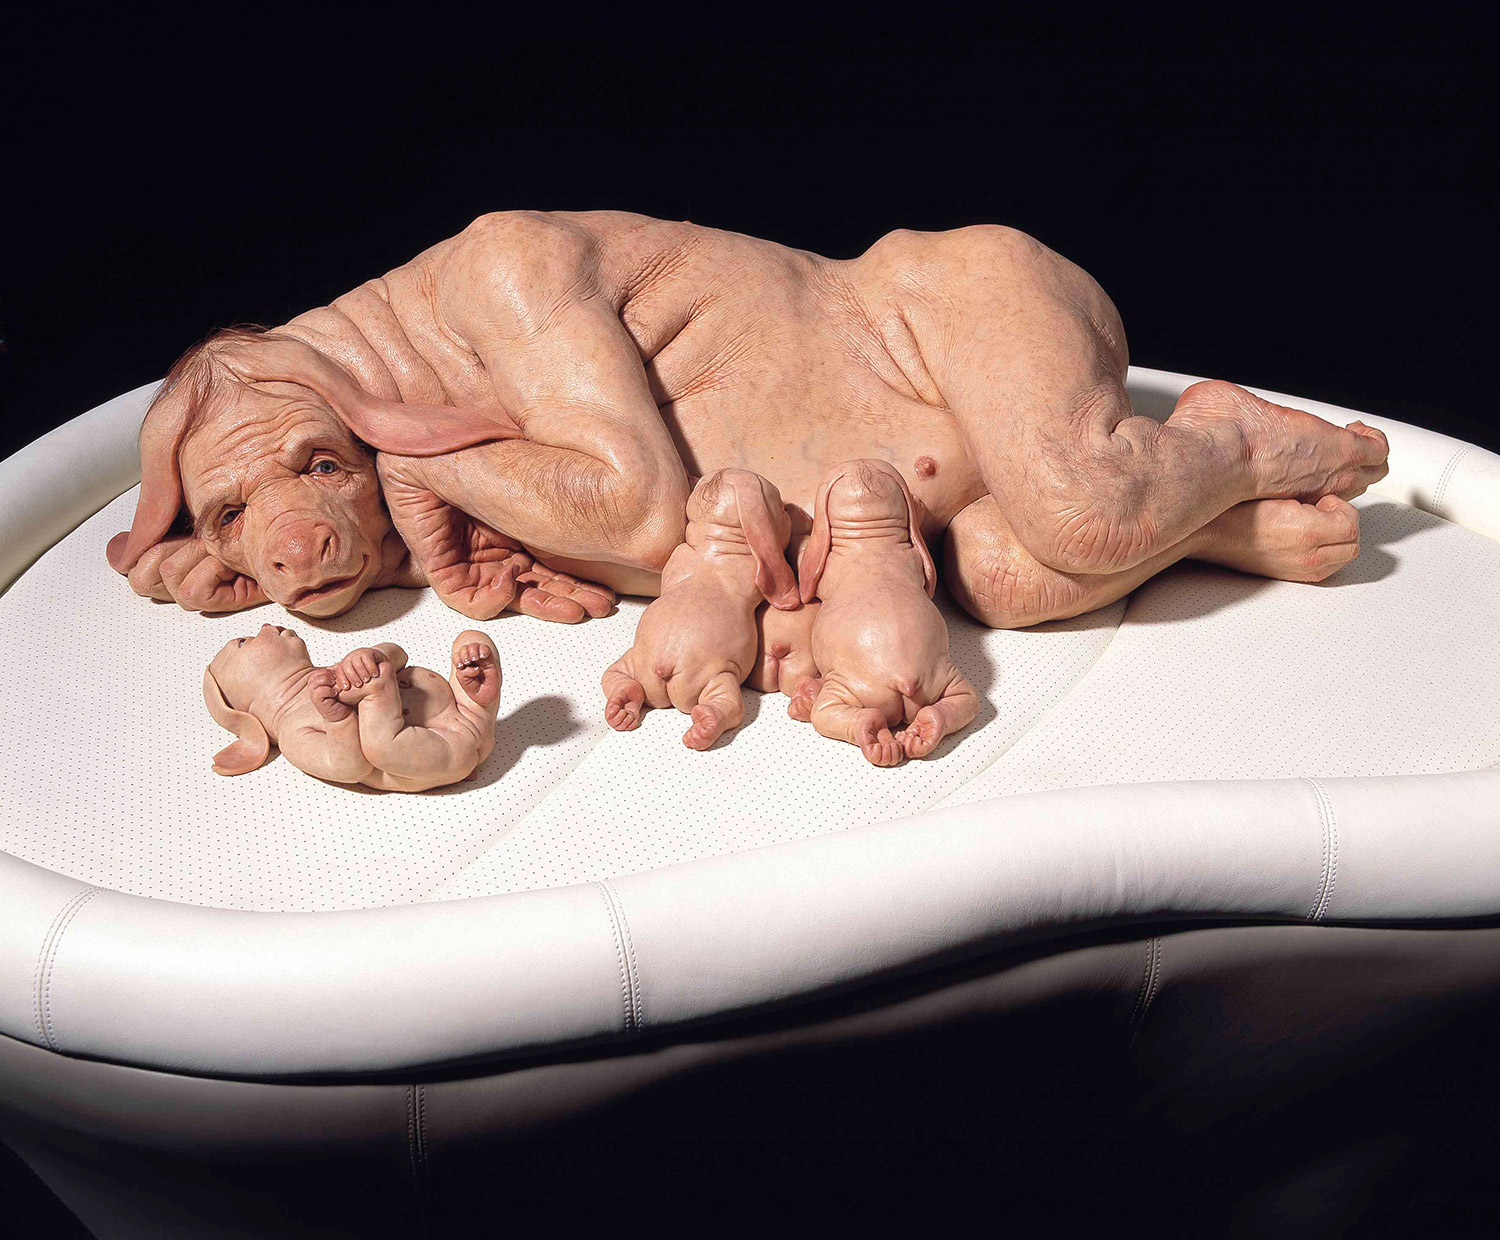 Patricia Piccinini, The Young Family - hybrid animal with offspring